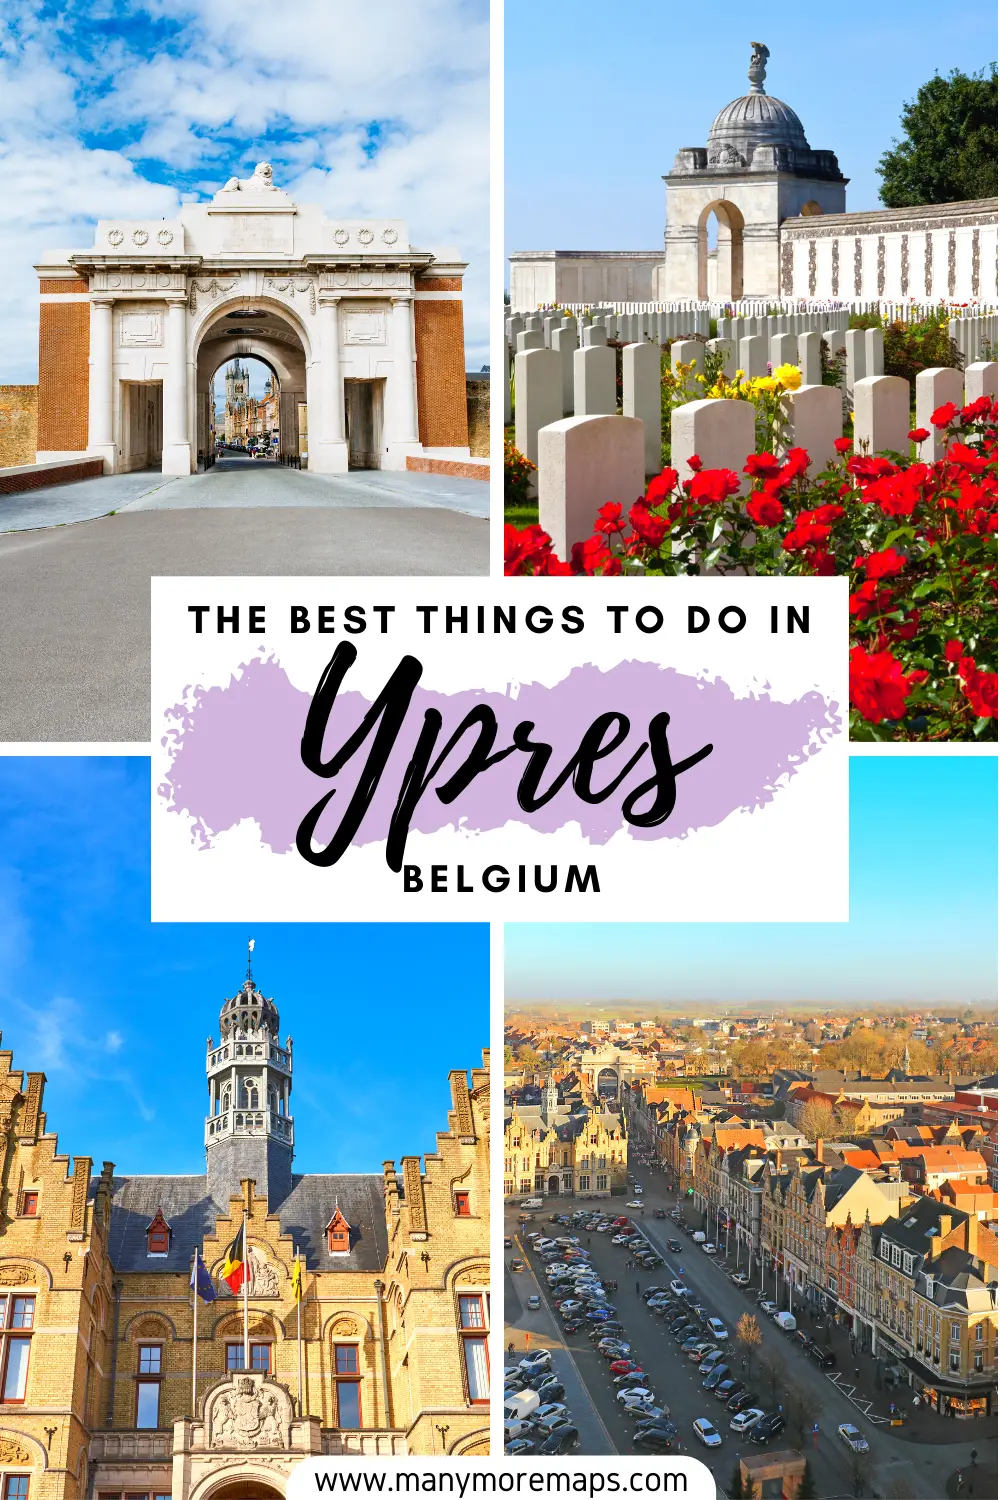 The best things to see and do, and places to visit, in Ypres to add to your Belgium travel itinerary! This complete travel guide includes the Menin Gate, Flanders Fields, the Last Post Ceremony, the Ypres Cloth Hall and more!